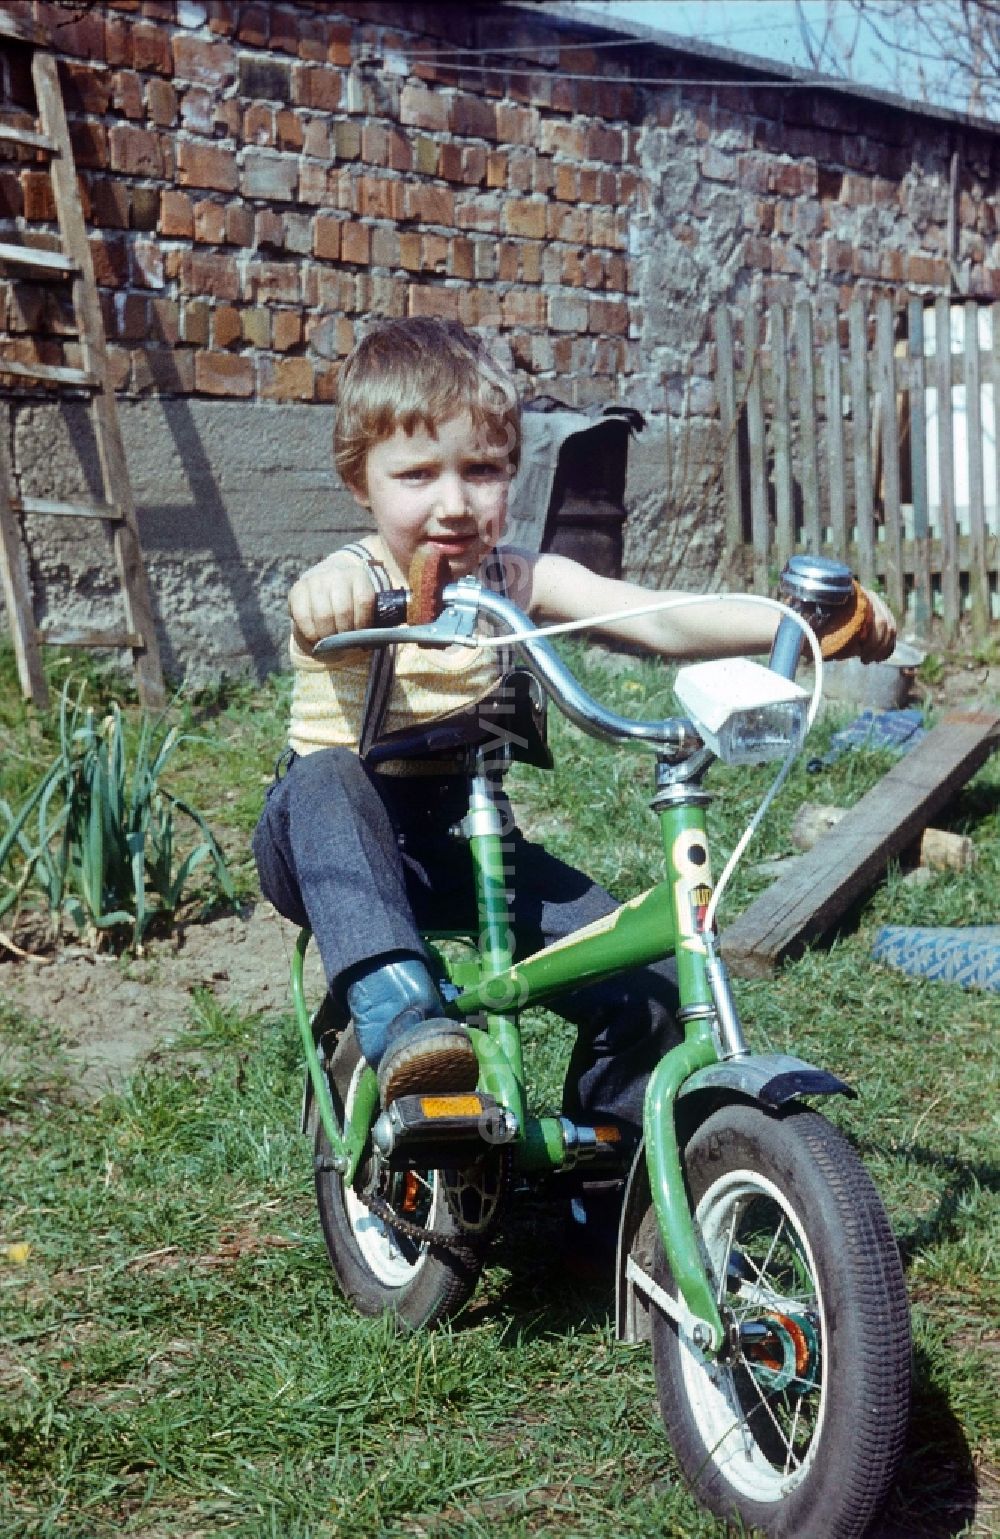 GDR picture archive: Neustrelitz - Boy on a green flash children's bicycle in Neustrelitz in the federal state Mecklenburg-West Pomerania in the area of the former GDR, German democratic republic